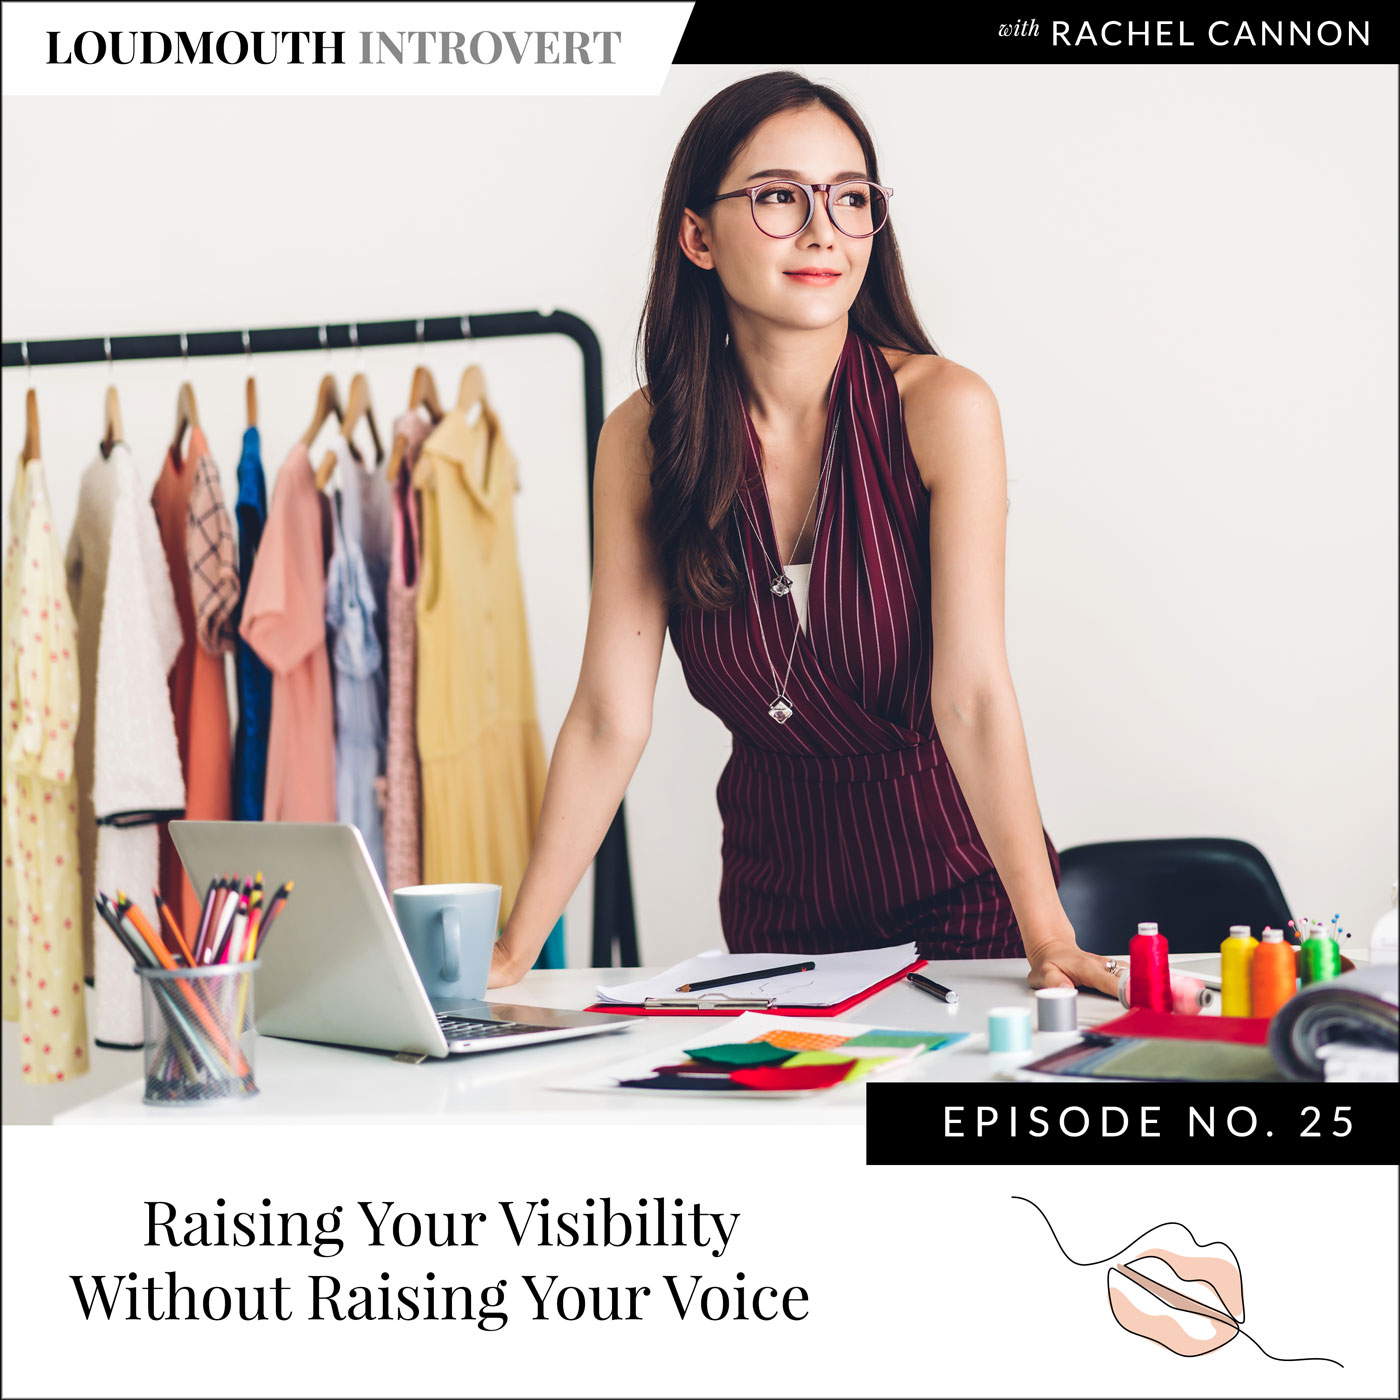 Raising Your Visibility Without Raising Your Voice